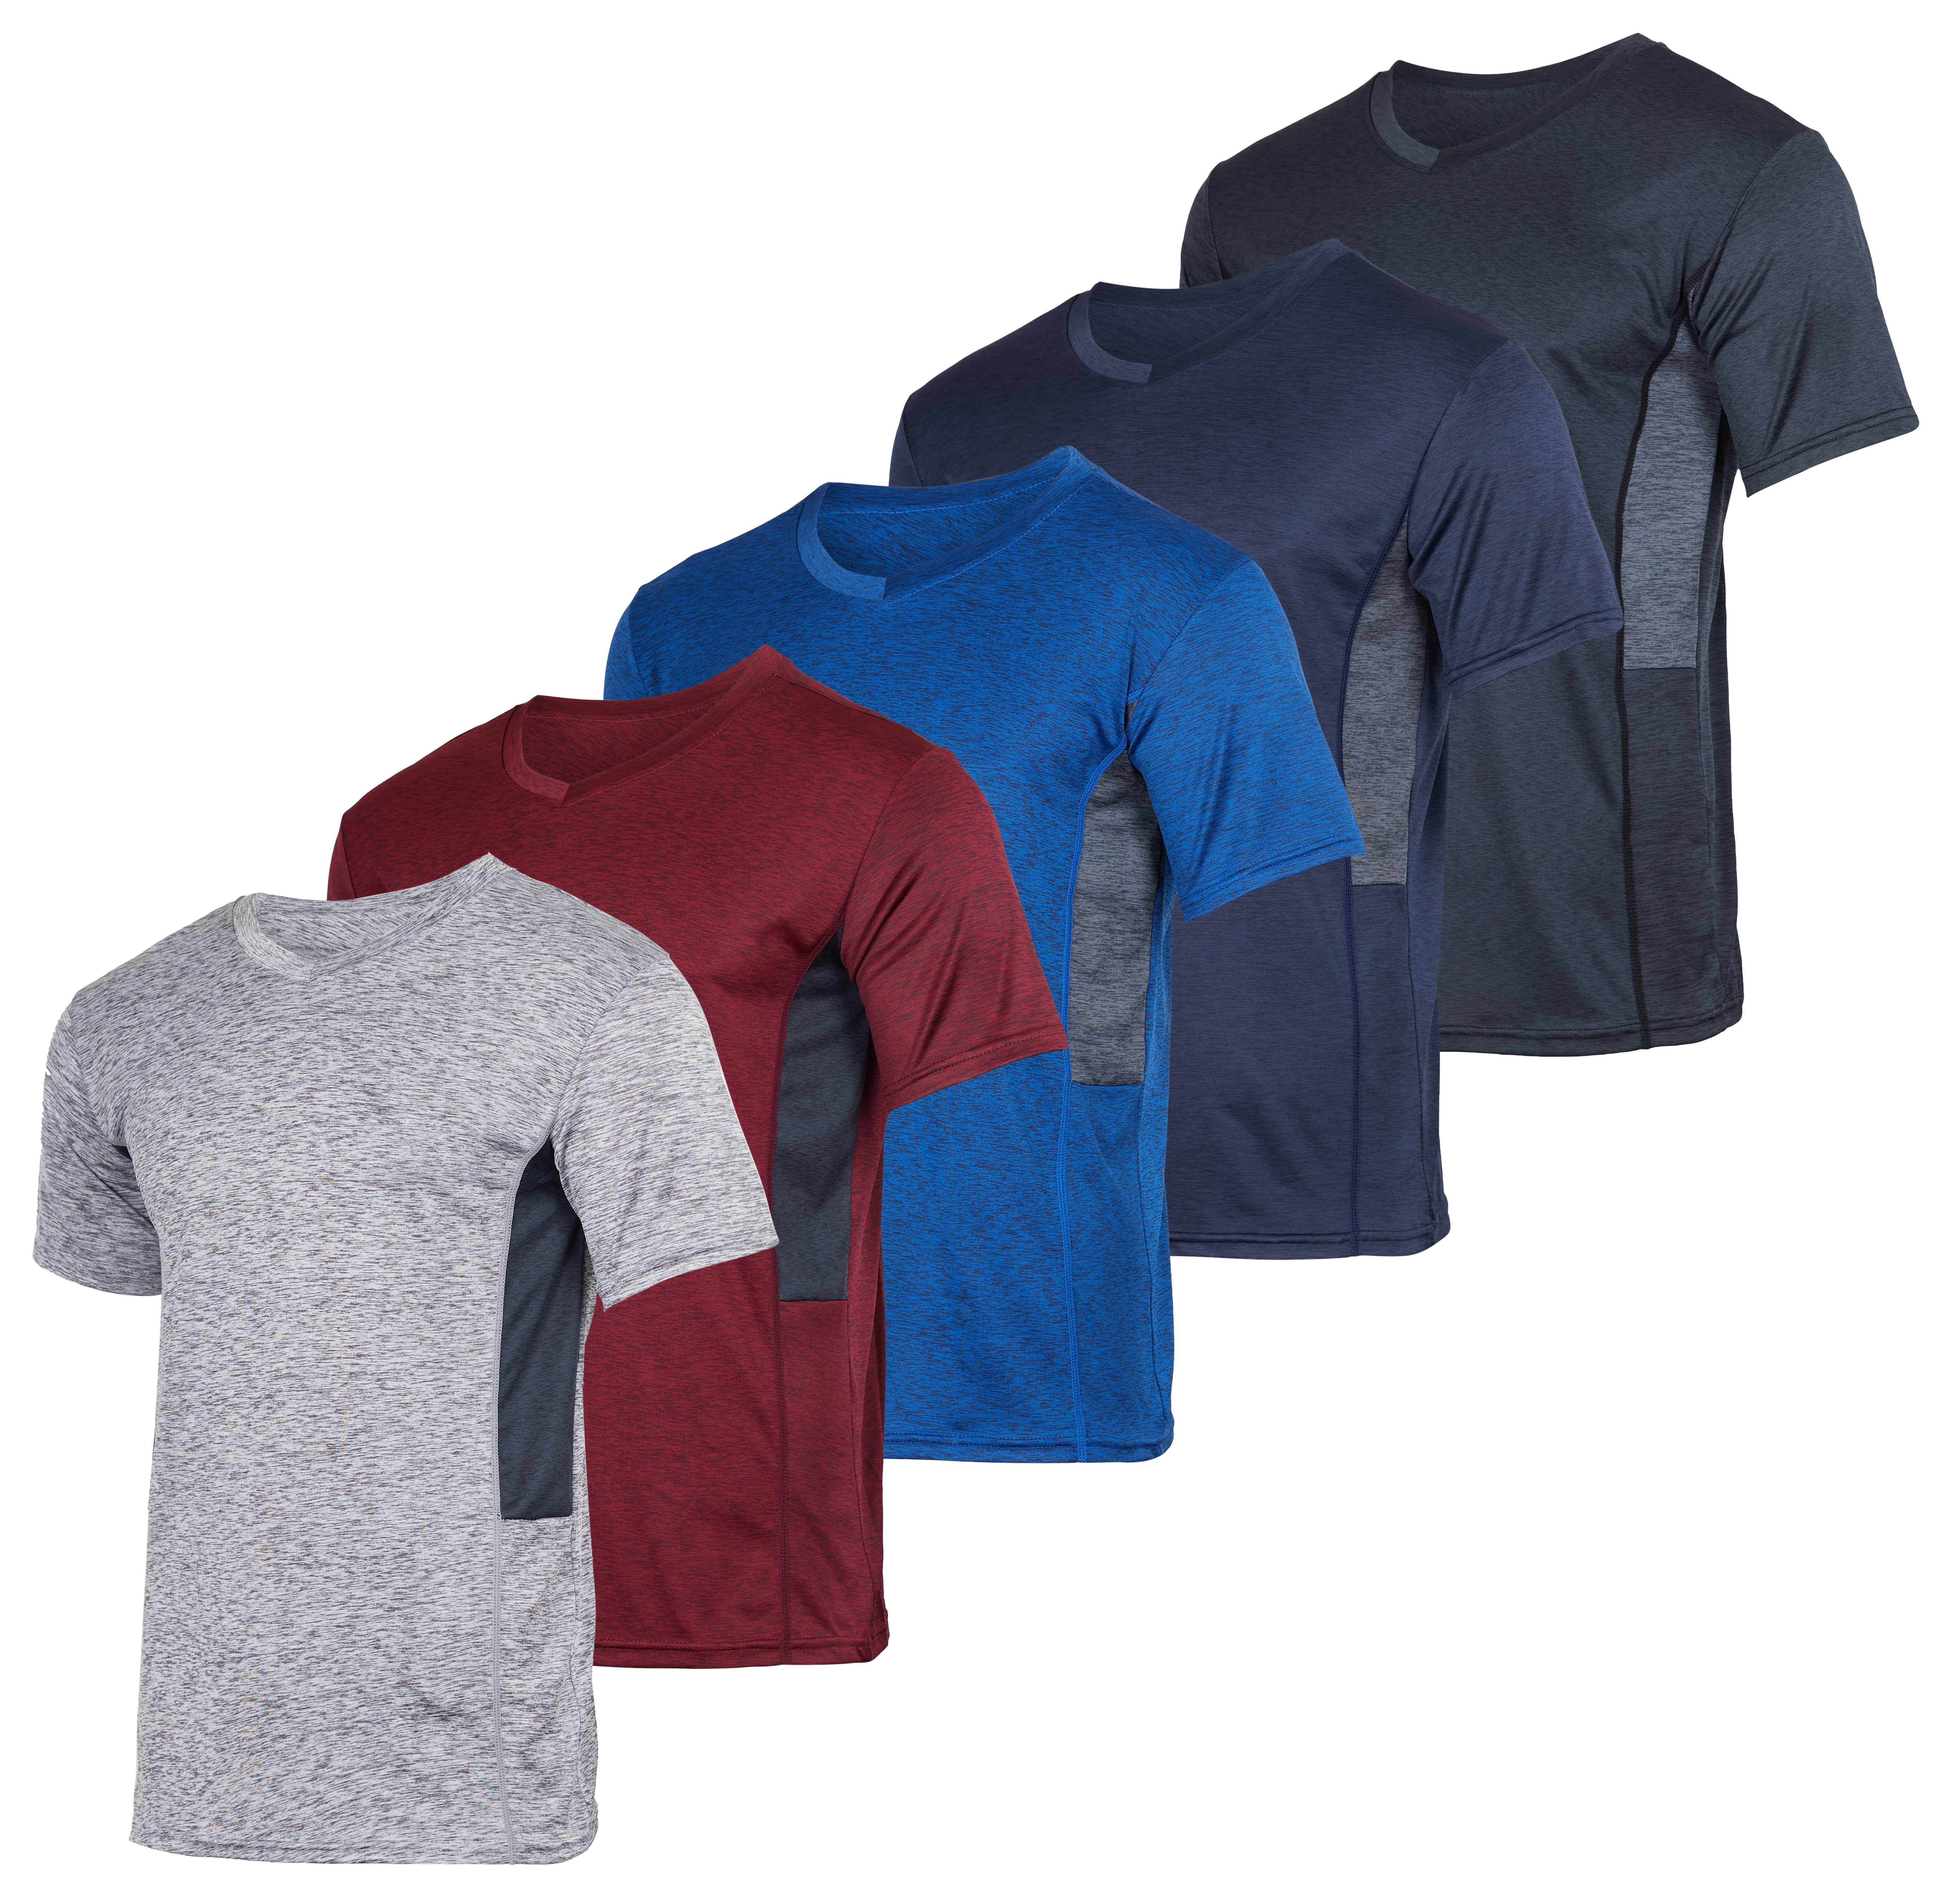 Details about   Mens Compression Shirts Cool dry Base layer Running Football Round Neck Slim fit 